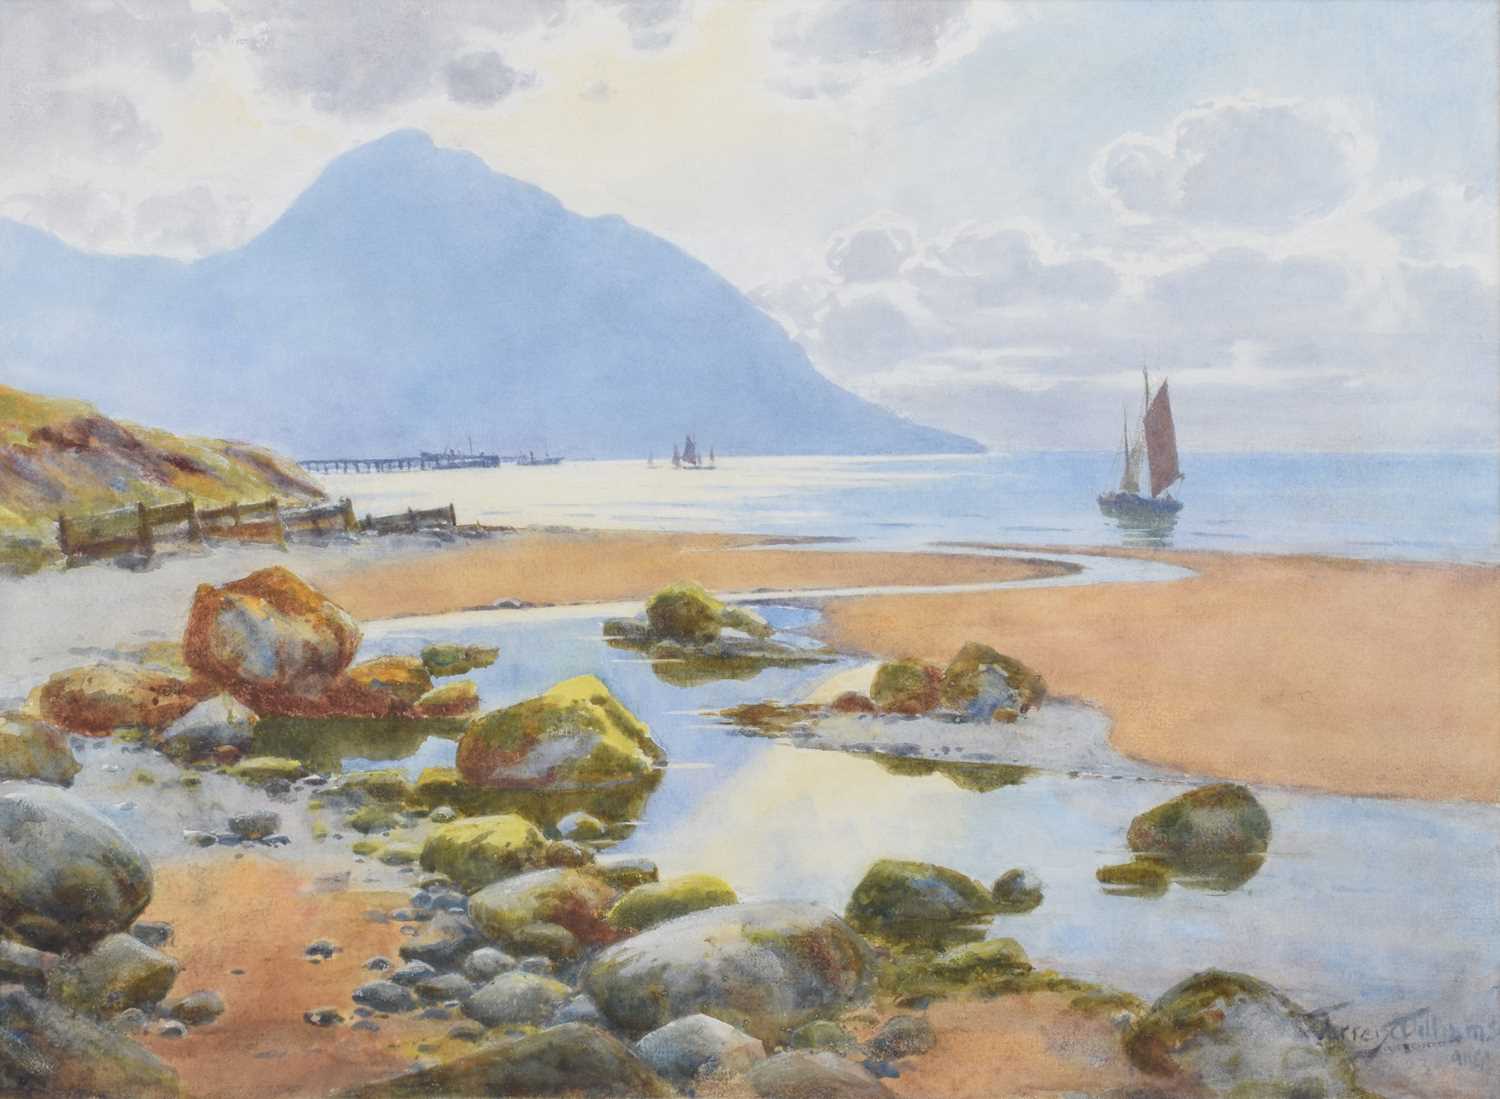 Warren Williams (1863-1941) "The Conwy Estuary and Penmaenmawr from the Deganwy Shore", watercolour.